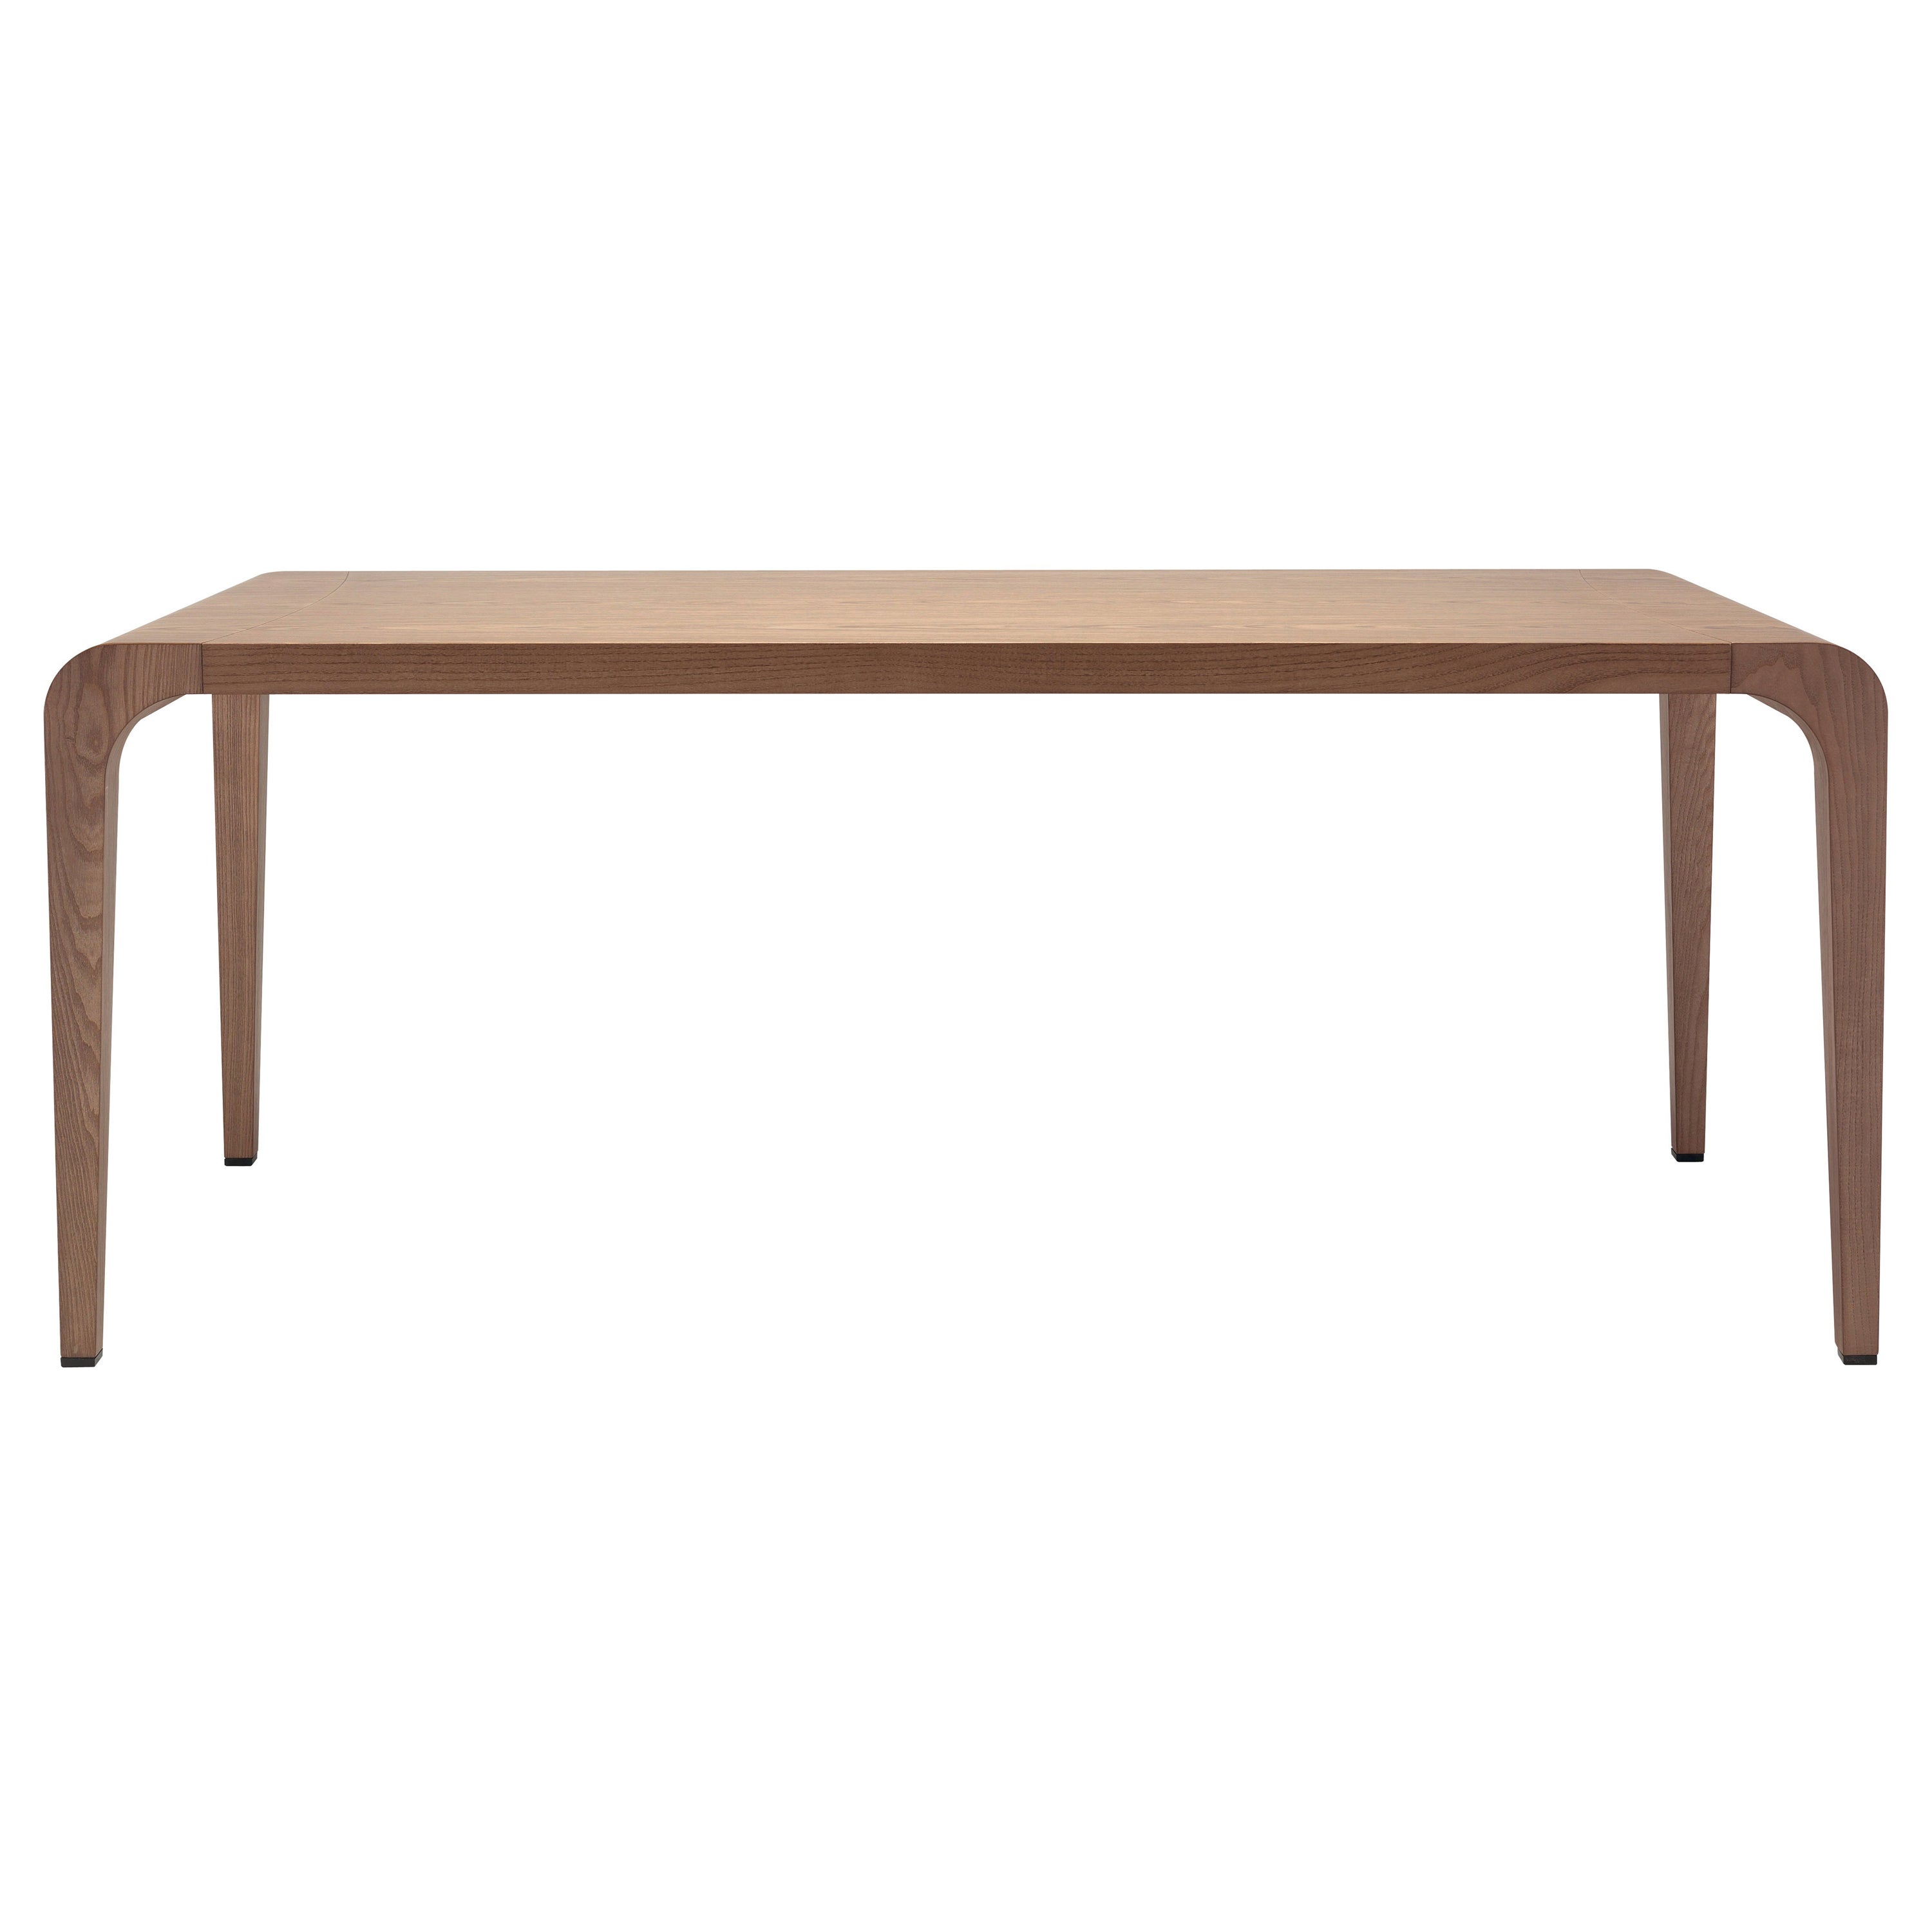 Alias Medium 390 Ilvolo Table in Oak Canaletto Walnut Wood Top and Frame